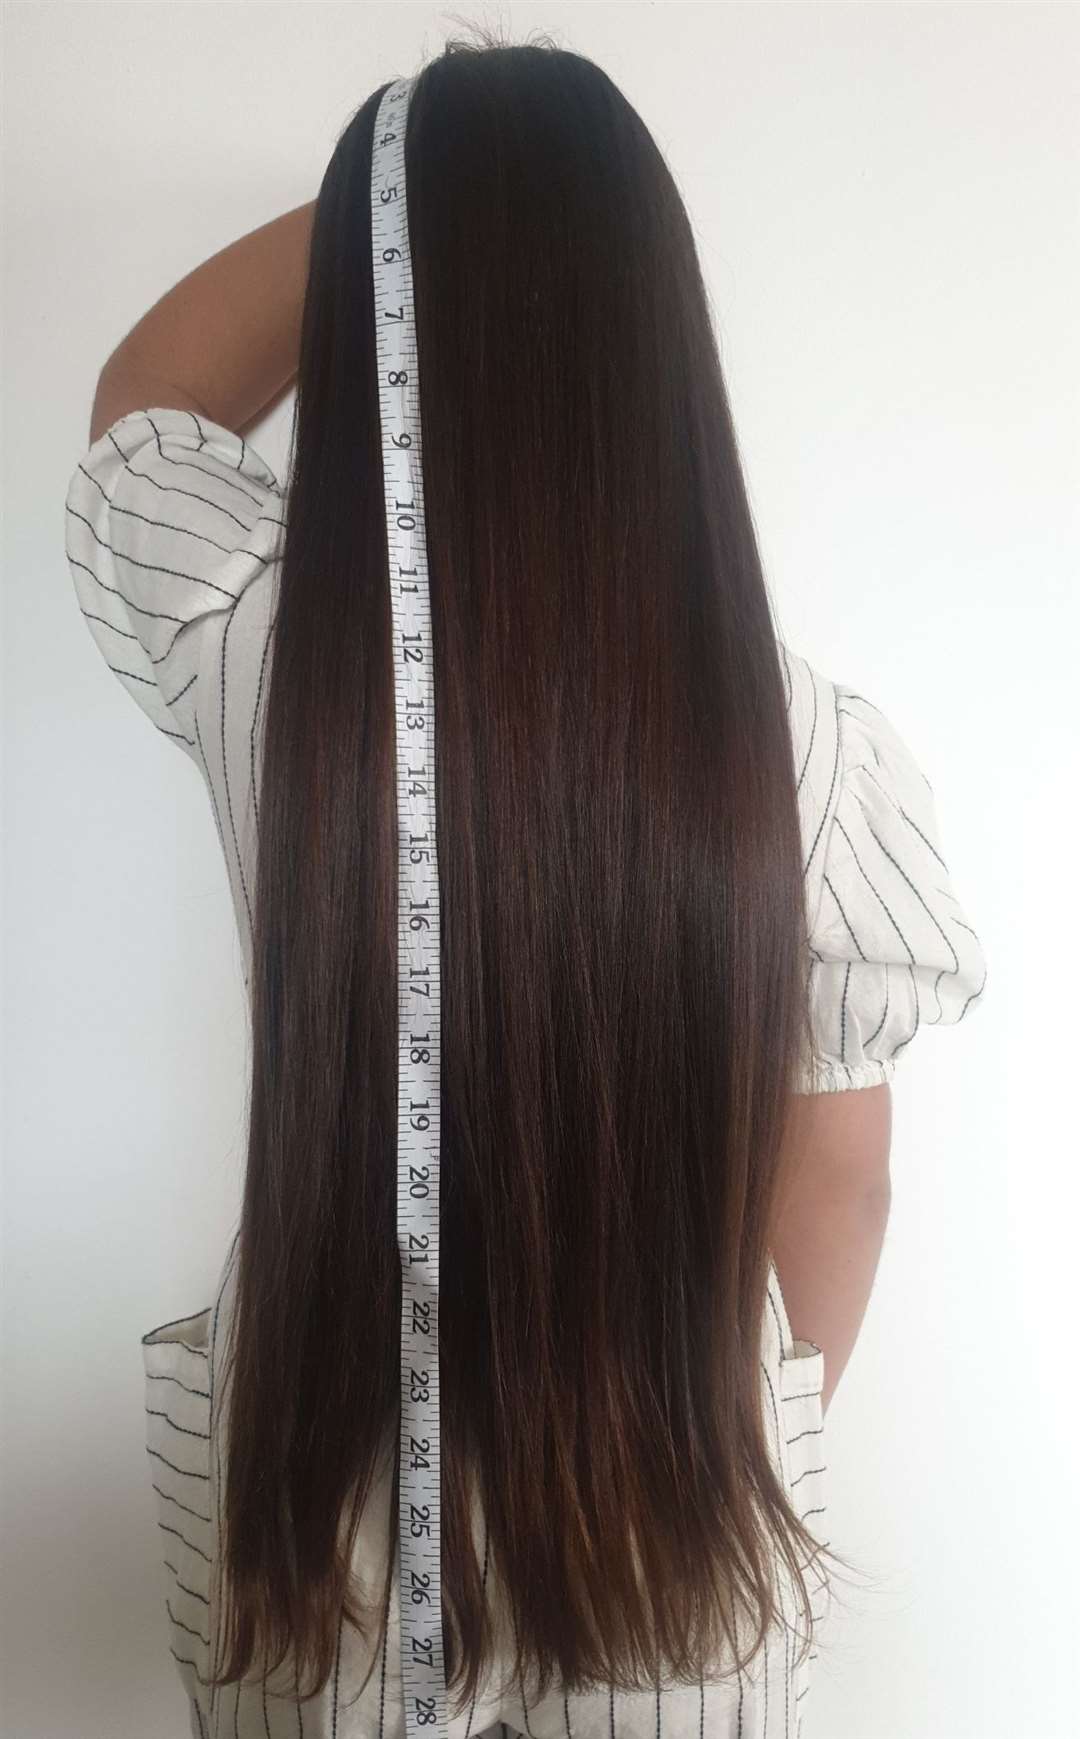 Laila's hair measured 28 inches. Picture: Safa Mirza